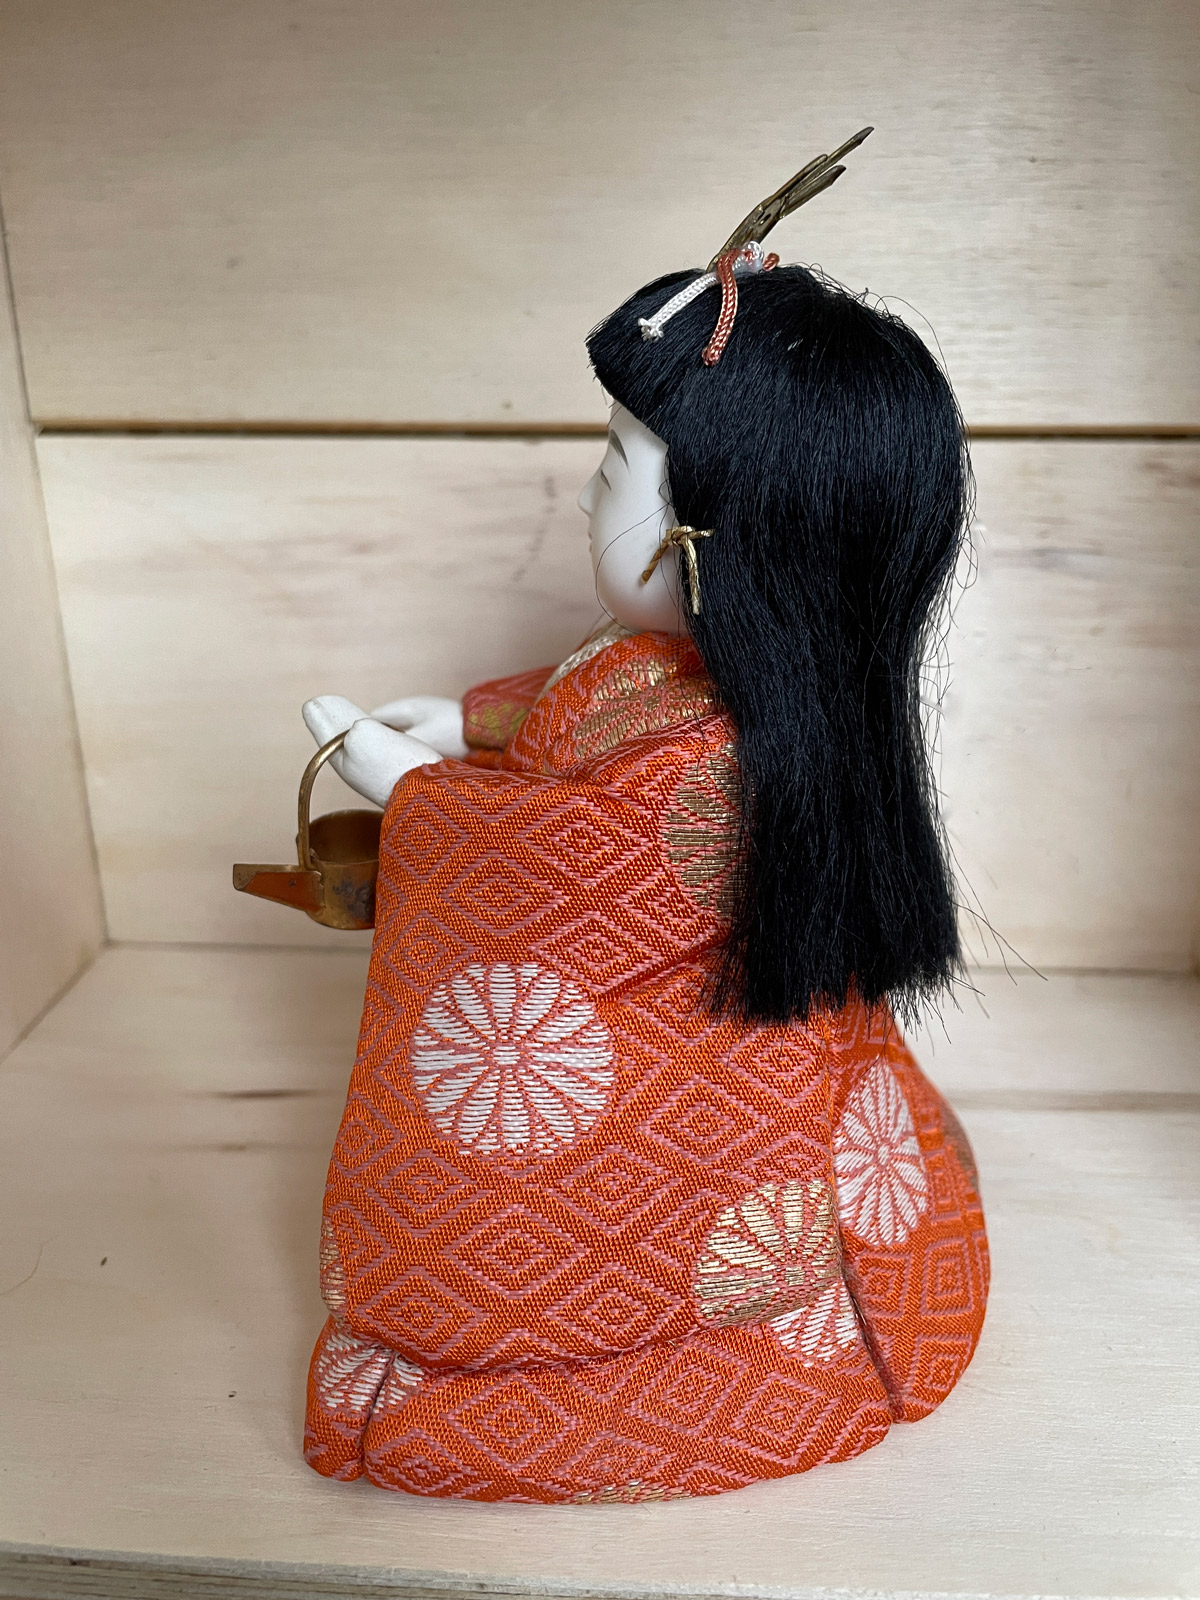 Vintage Hina doll – lady in waiting